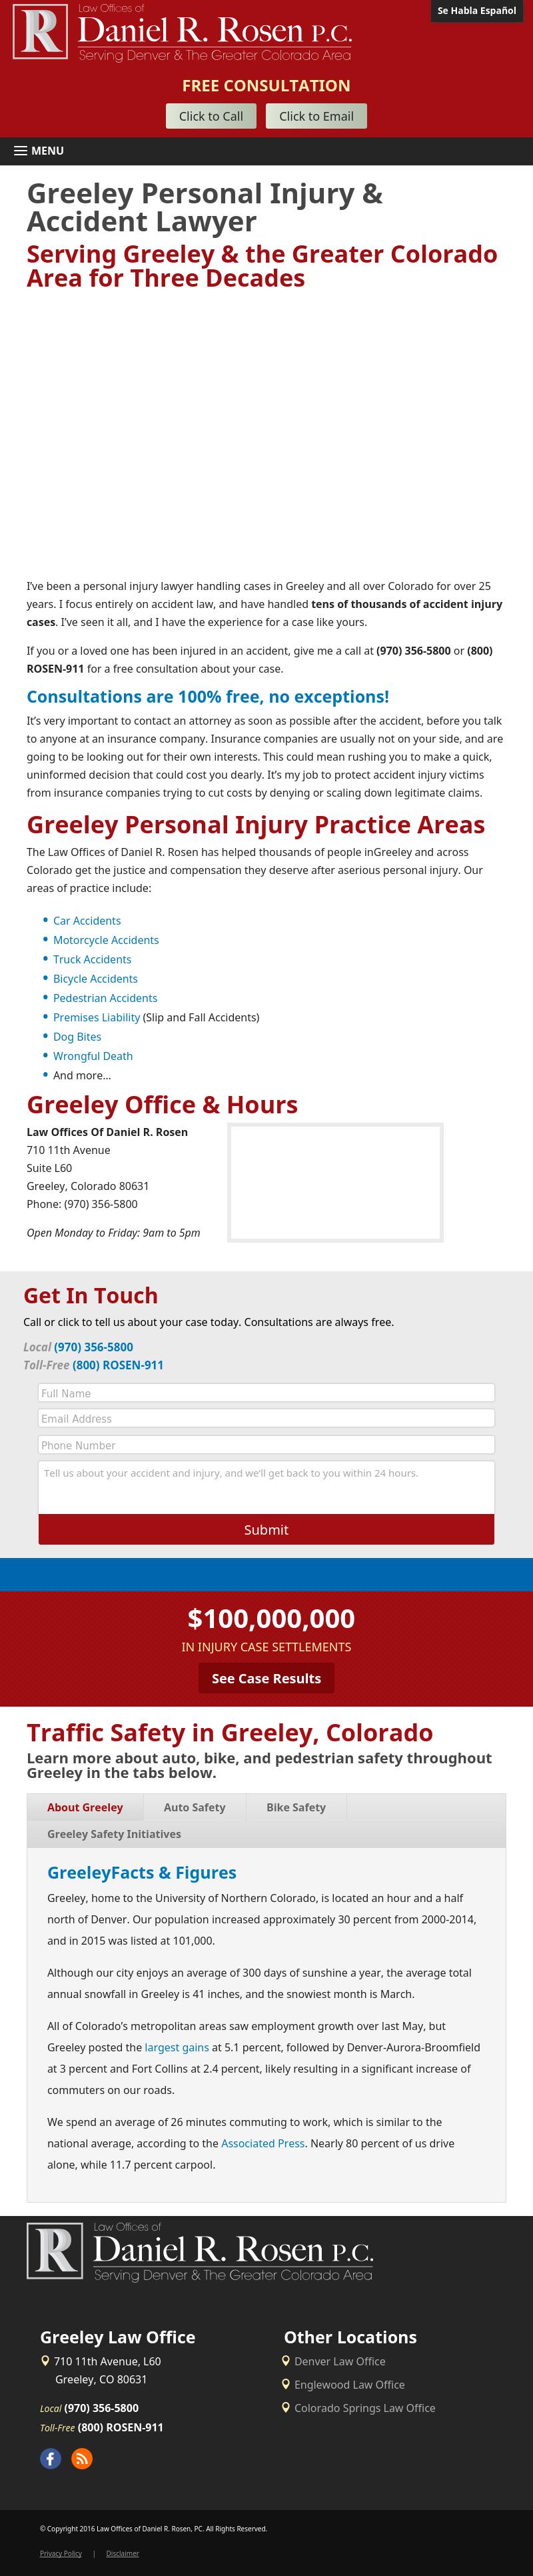 Law Offices of Daniel R. Rosen - Greeley CO Lawyers